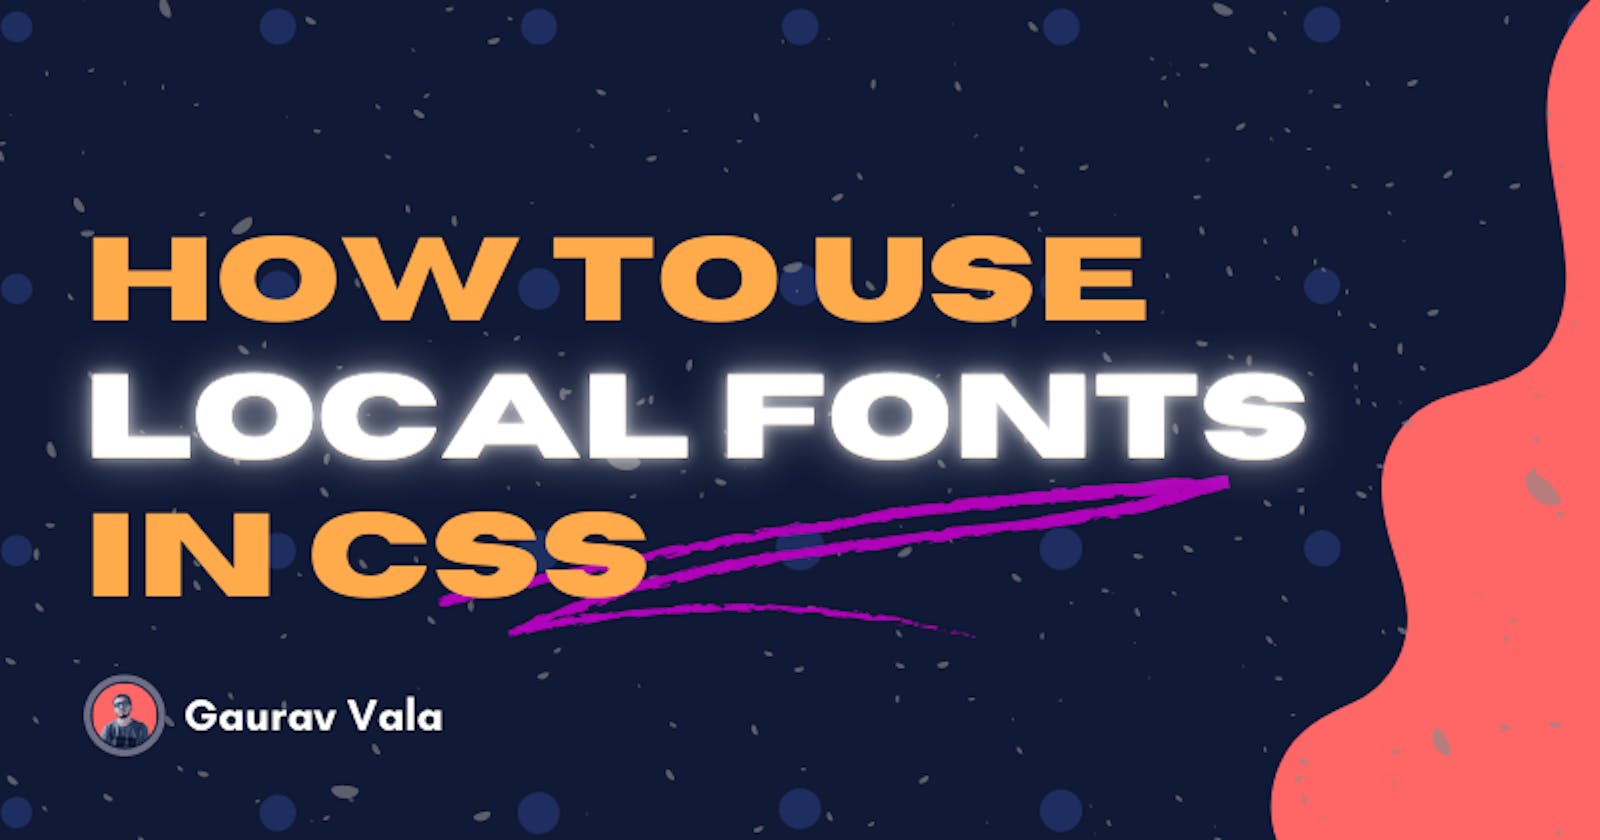 How to use Local fonts in CSS